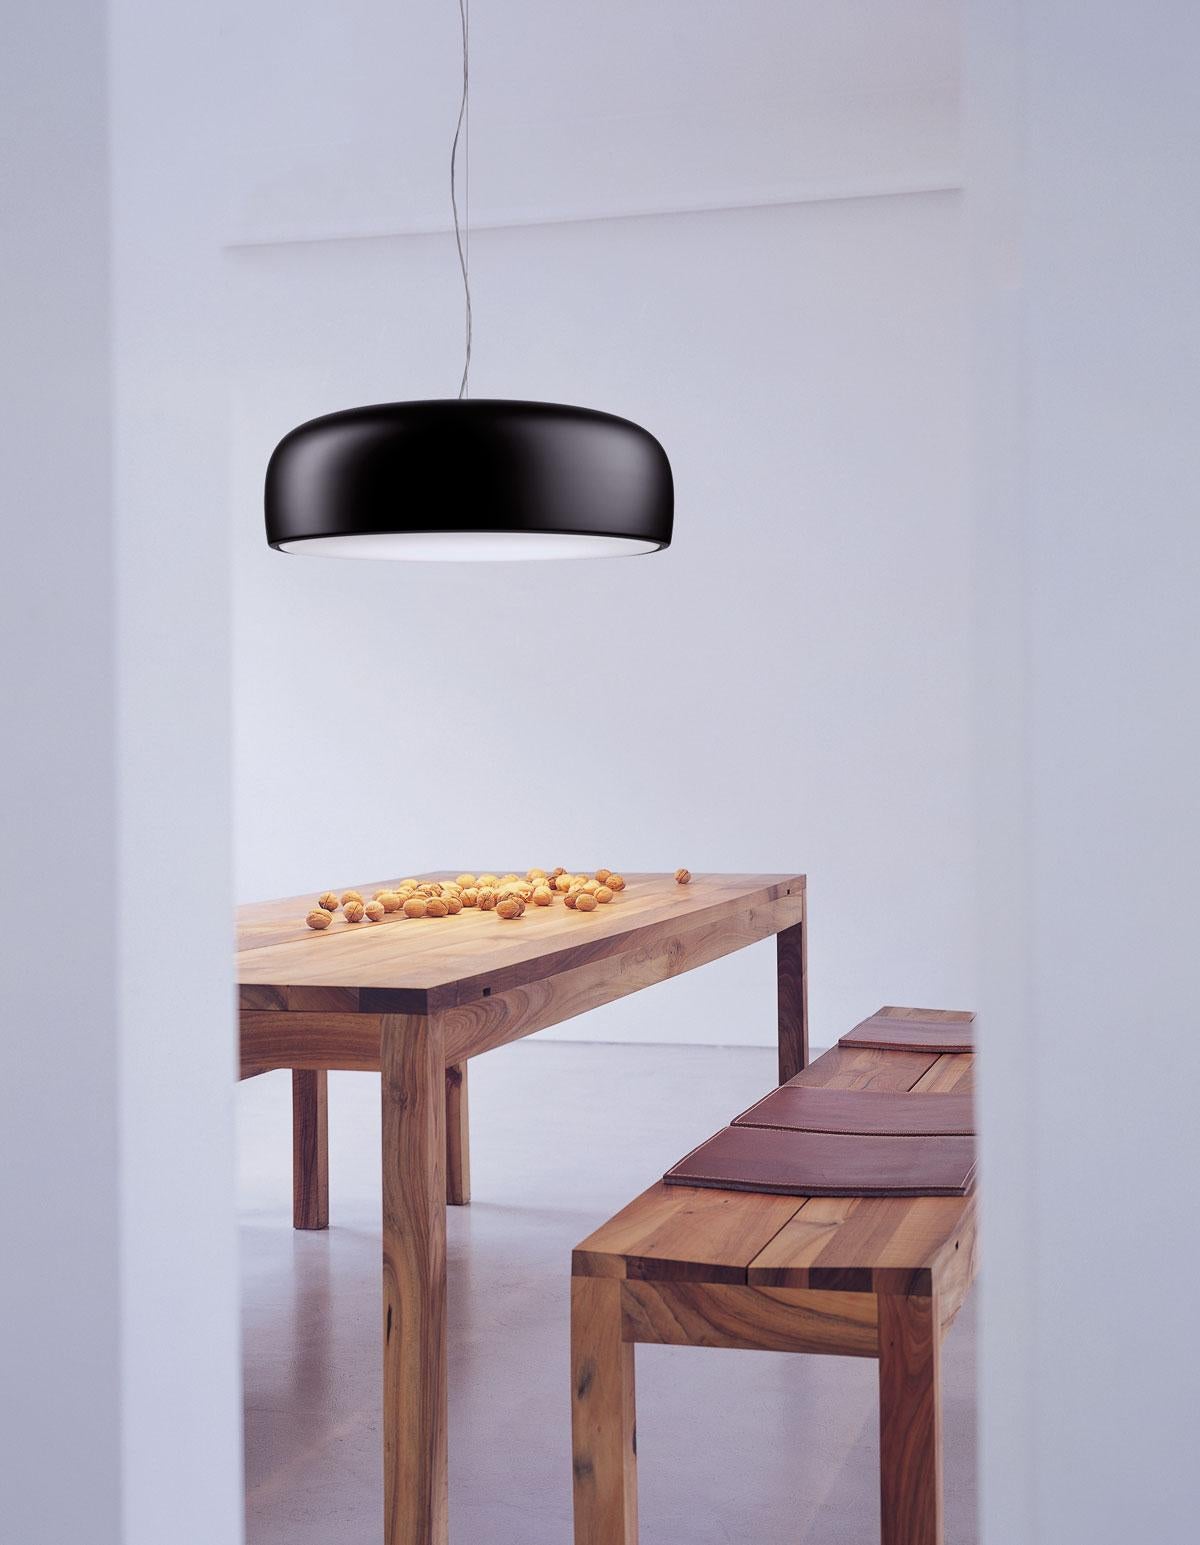 Flos Smithfield suspension lamp in matte black by Jasper Morrison

Material: Aluminum, polycarbonate
Lamp type: Halogen
Lamp included: Yes
Light source: 1 x 200W T3 RSC halogen (Included)
Mounting: Ceiling pendant
Dimming protocol: